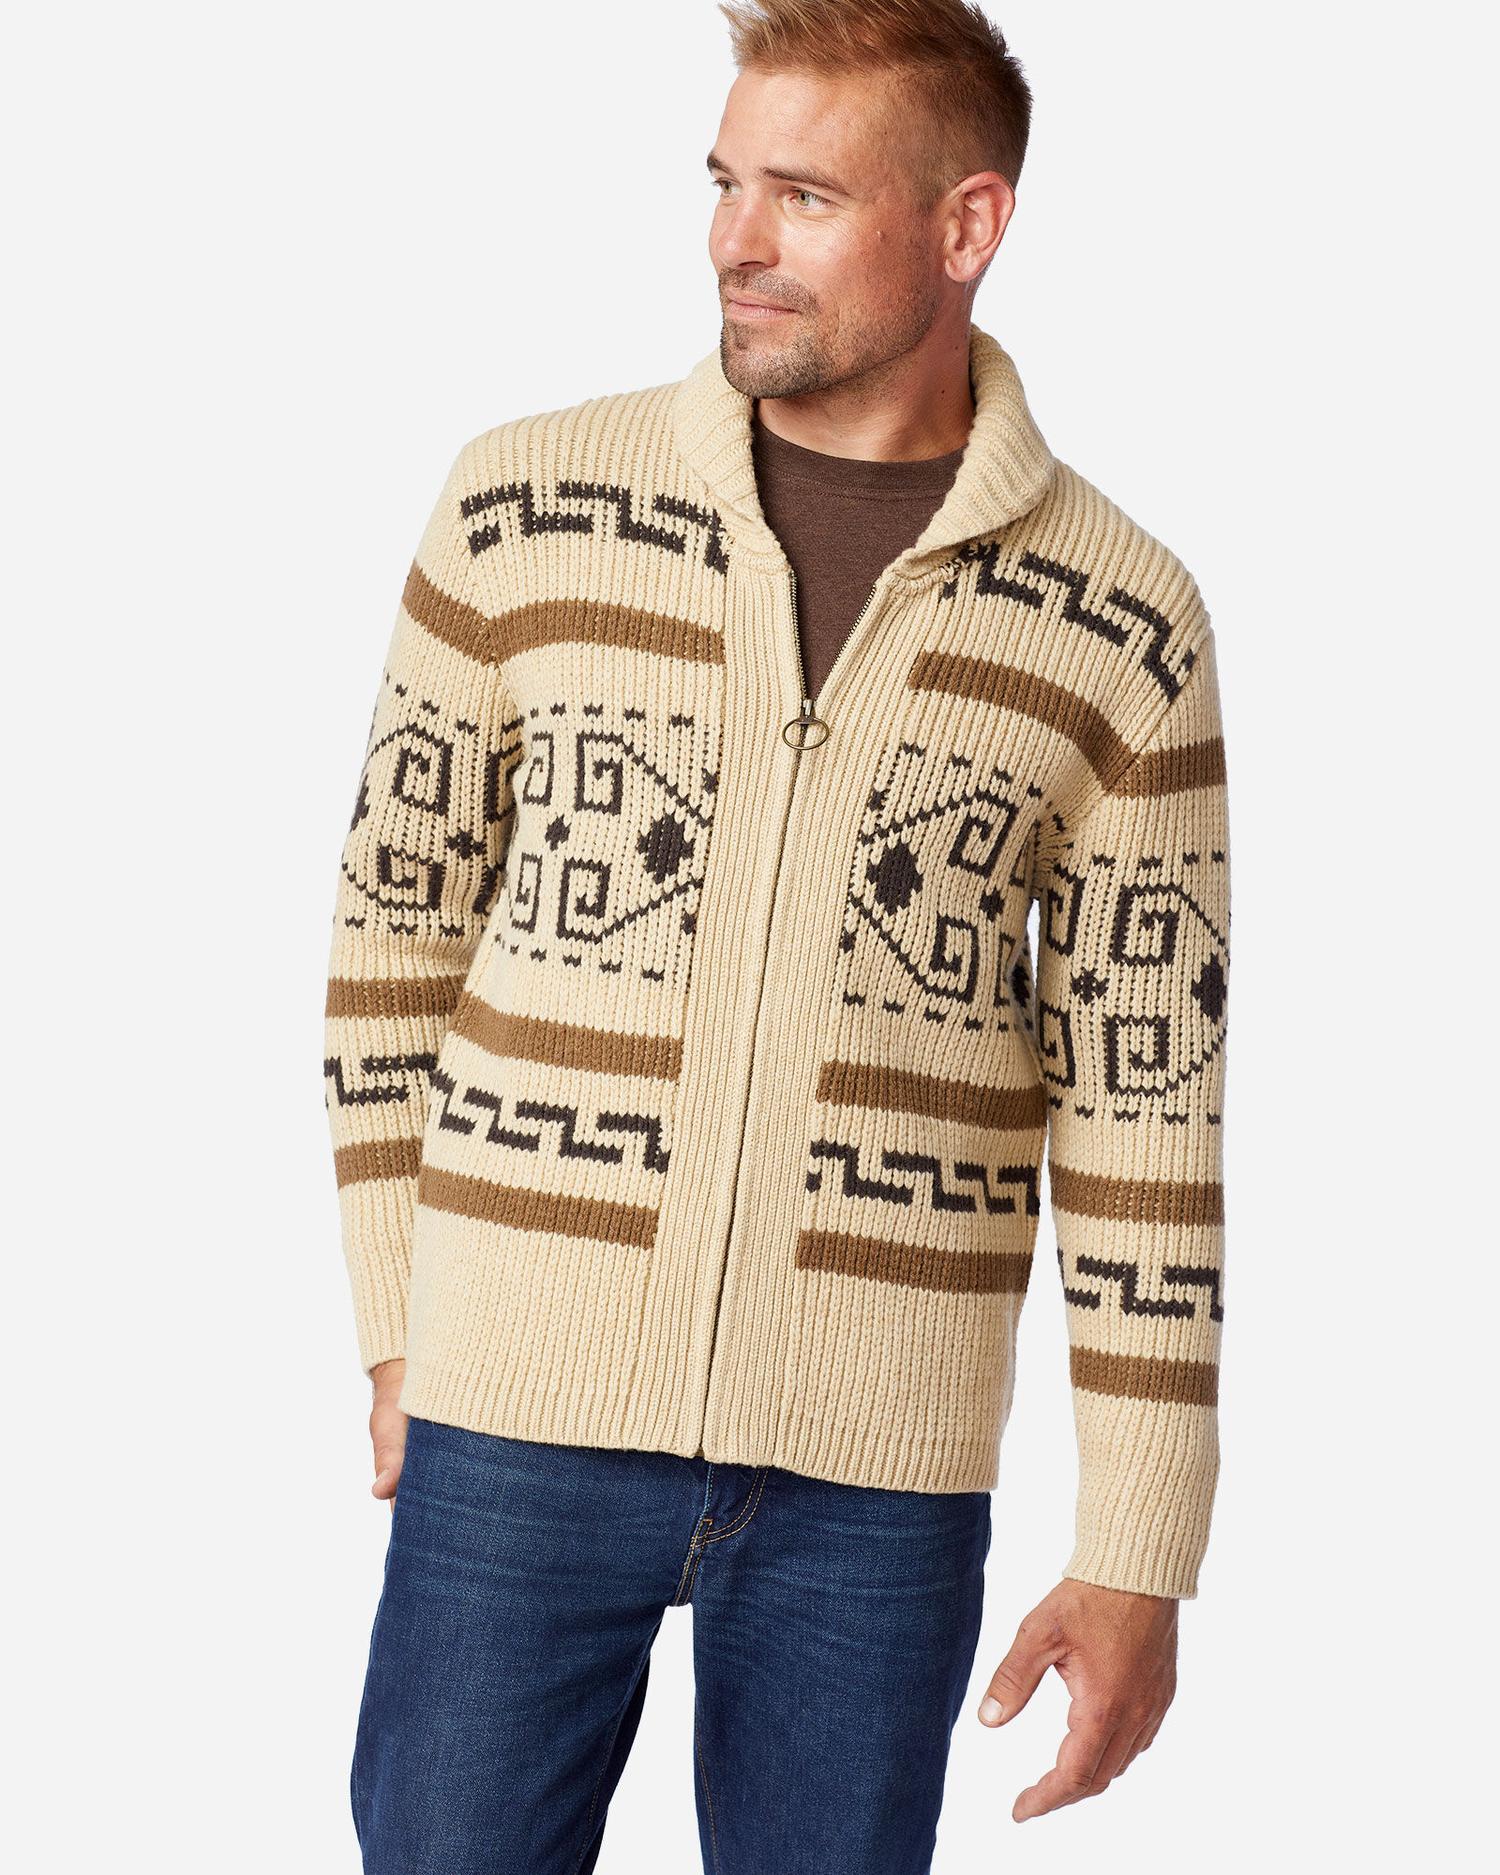 Pendleton - Similar stores, new products, store review, Q&A | Modvisor